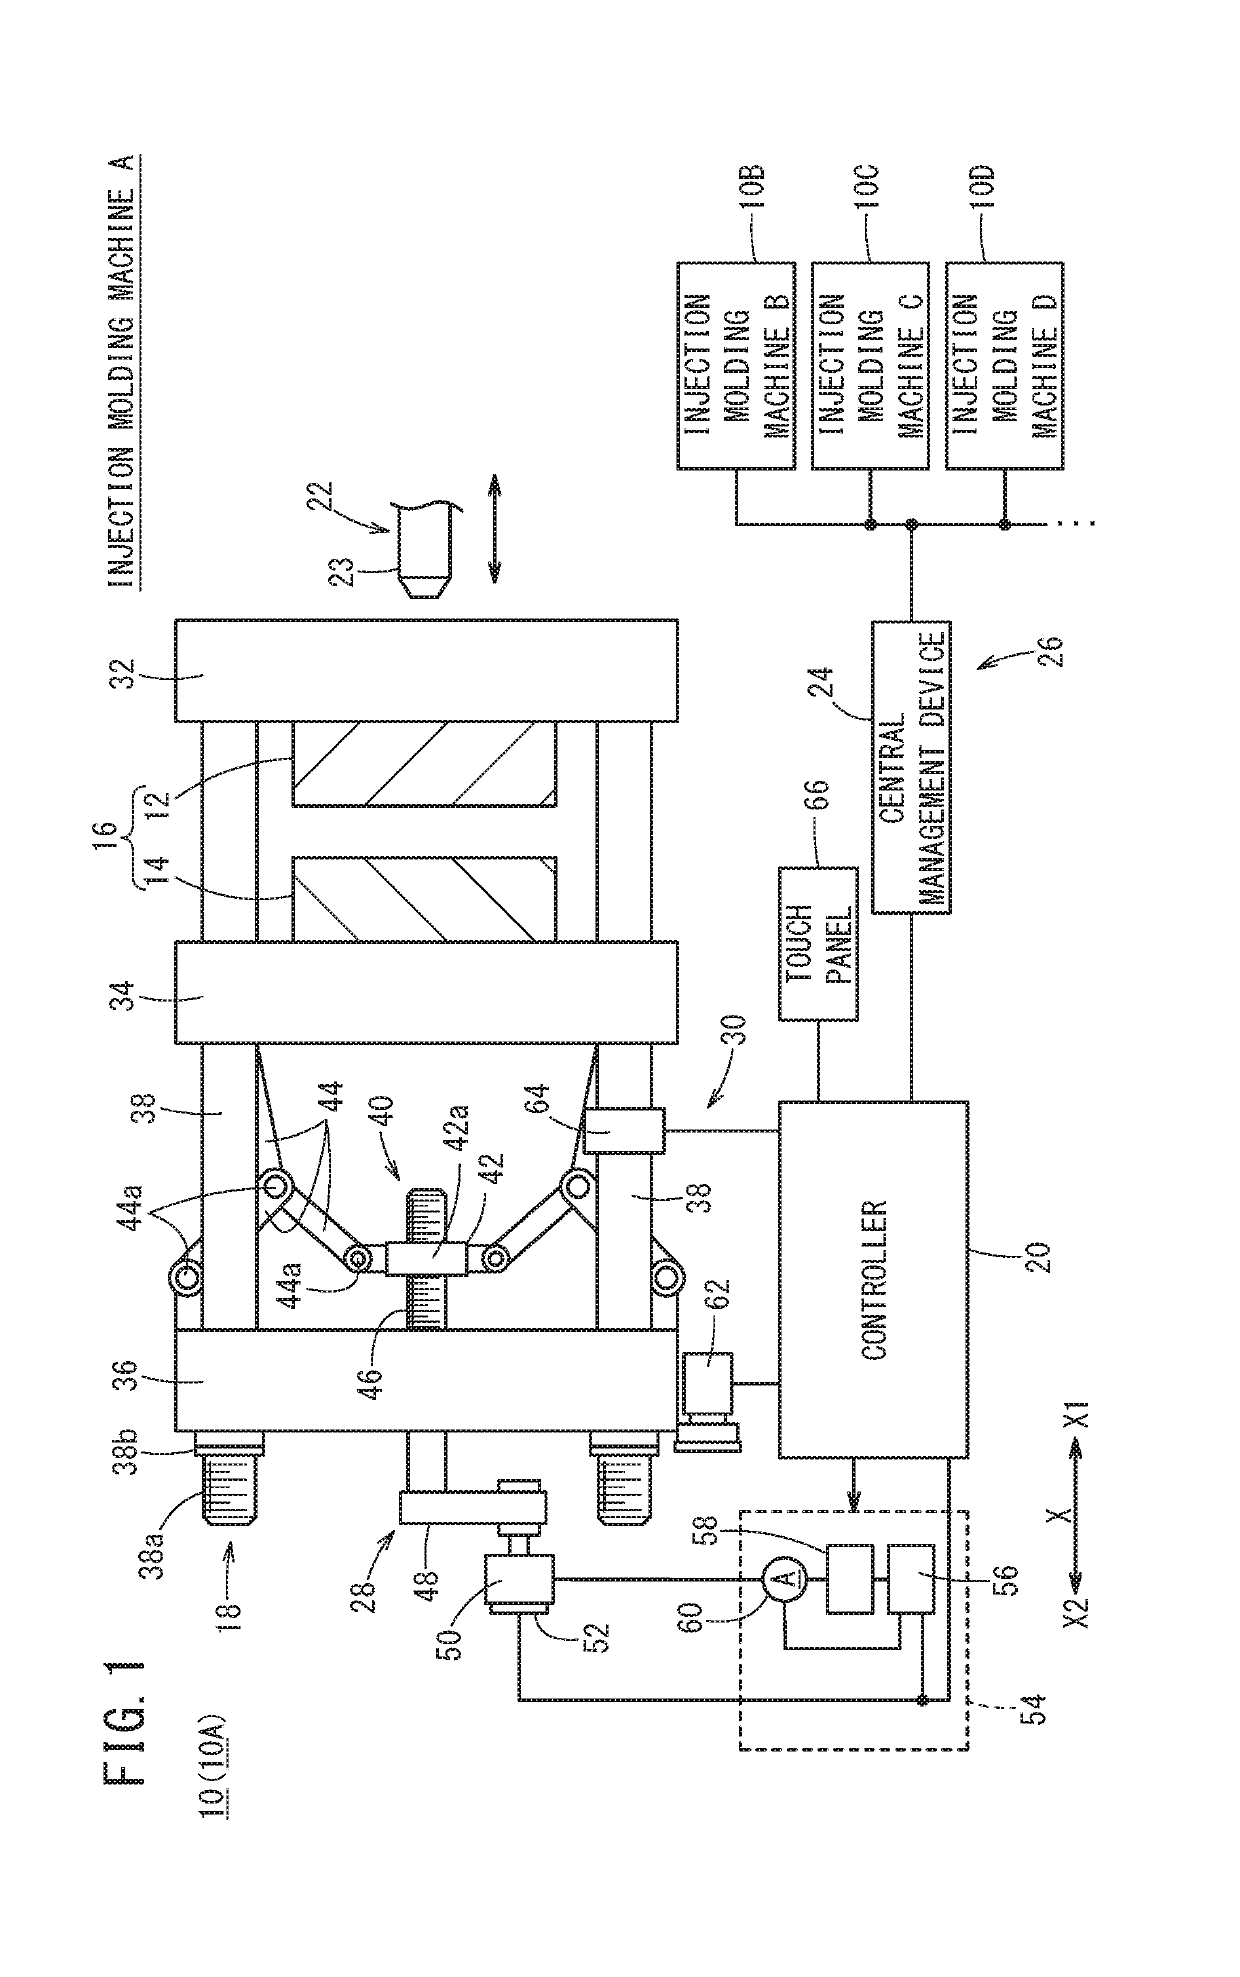 Controller and management system for injection molding machine